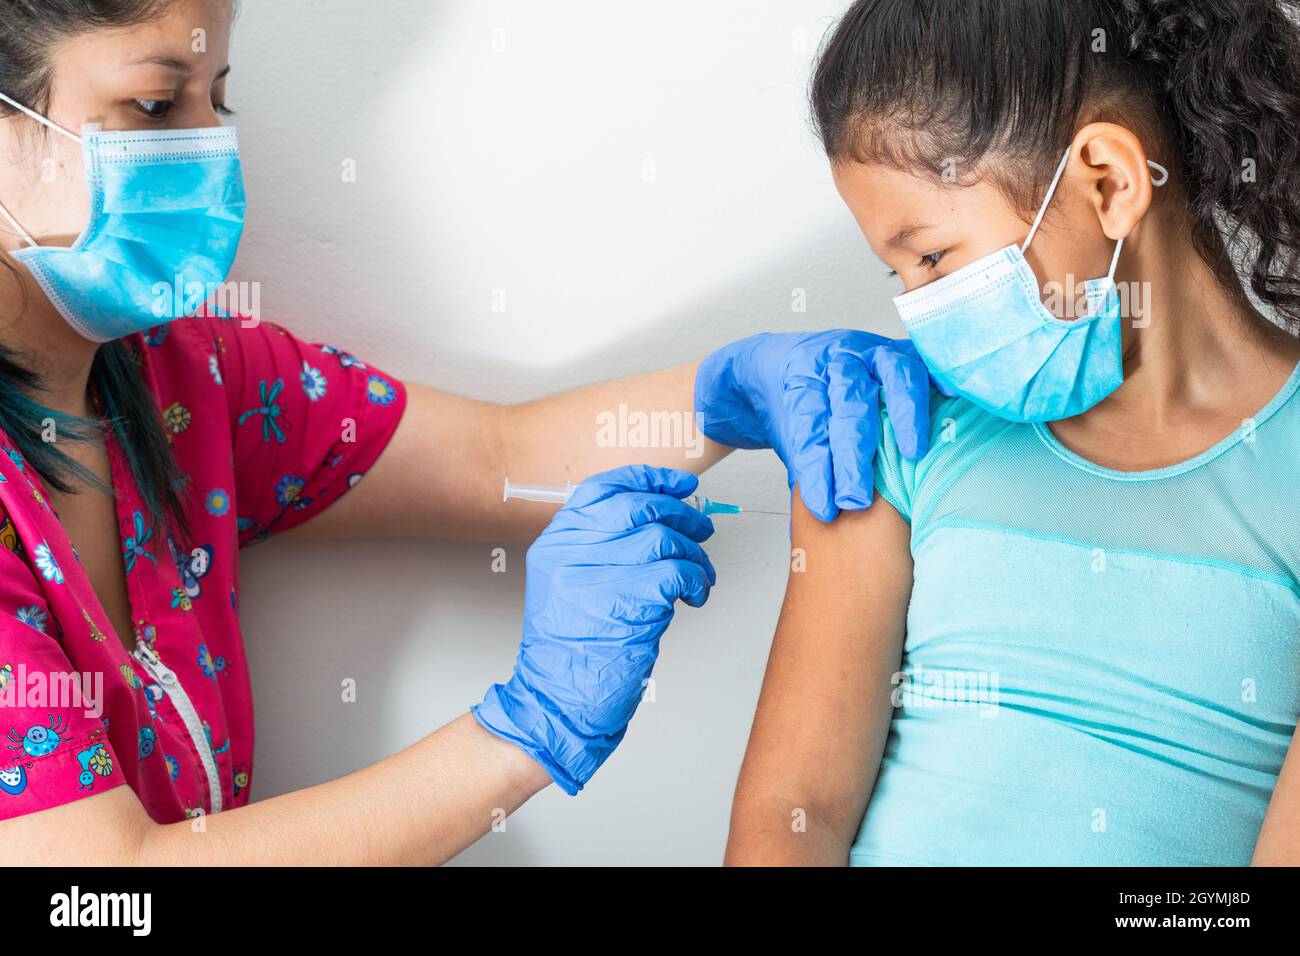 children's nurse injecting arm of little brown girl, girl afraid of injection. doctor's hands with rubber gloves injecting covid-19 or flu vaccine. me Stock Photo